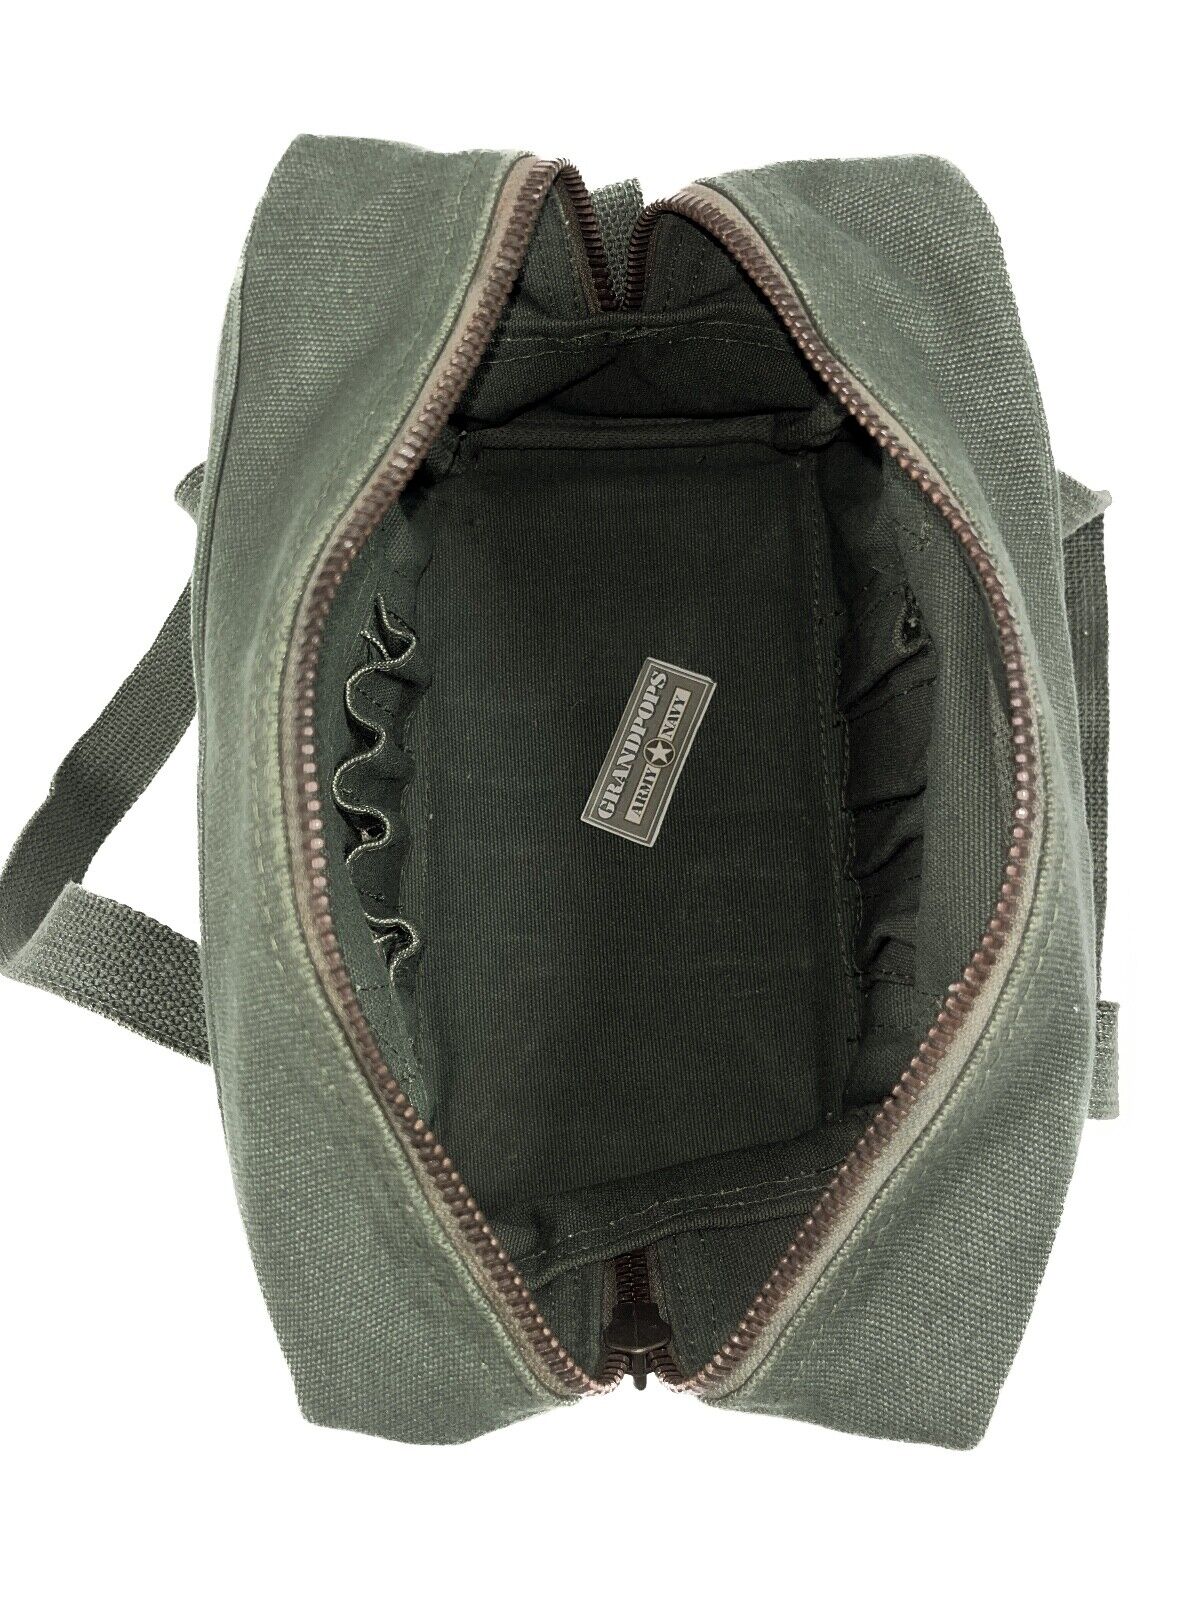 CANVAS TOOL POUCH - WATER REPELLANT W/ BELT LOOPS | Guillevin